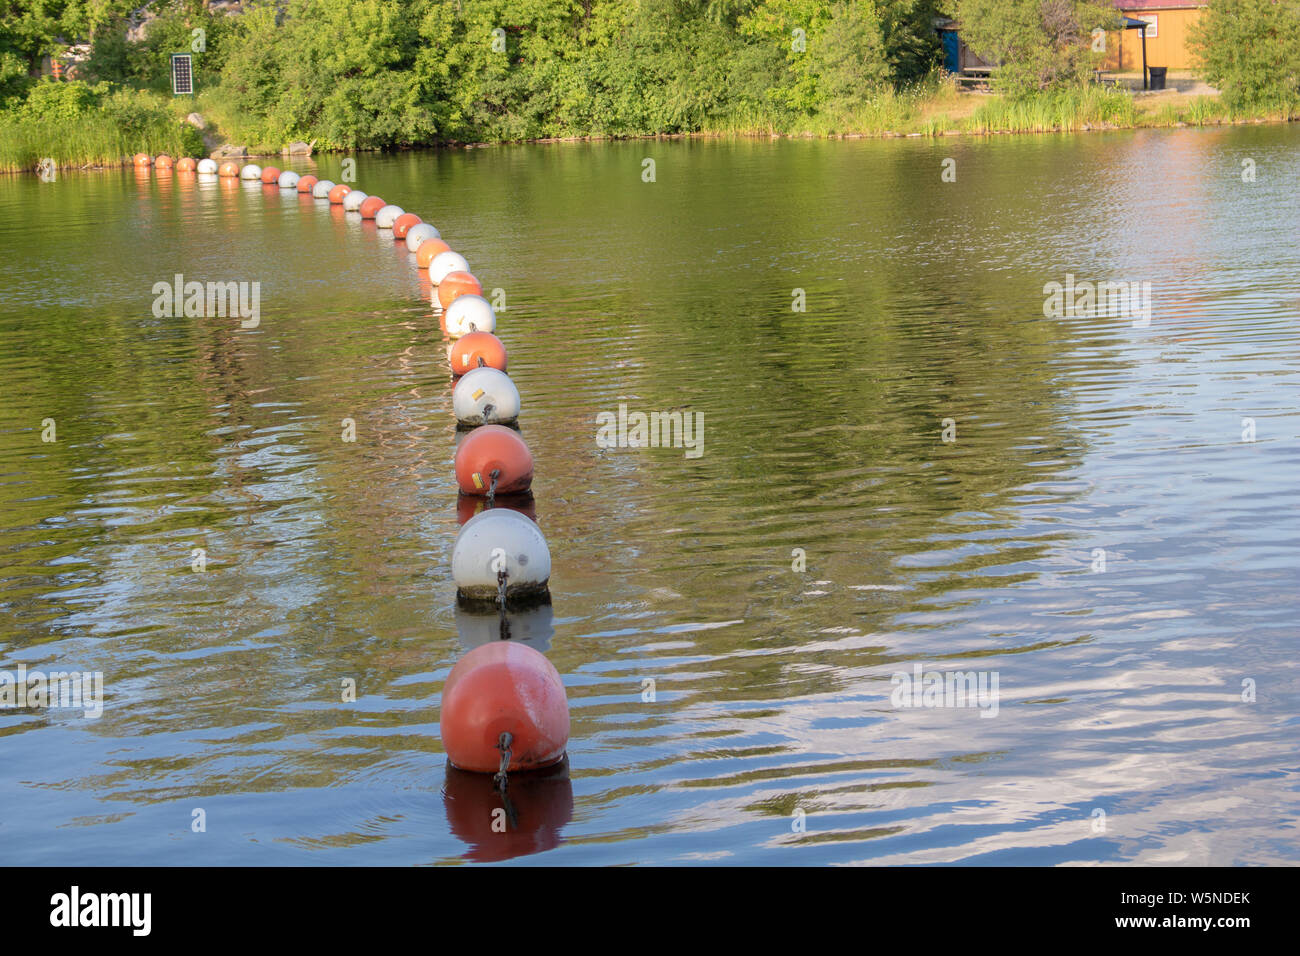 A barrier of floating buoys blocks a river, preventing boats from heading towards an open dam. Stock Photo